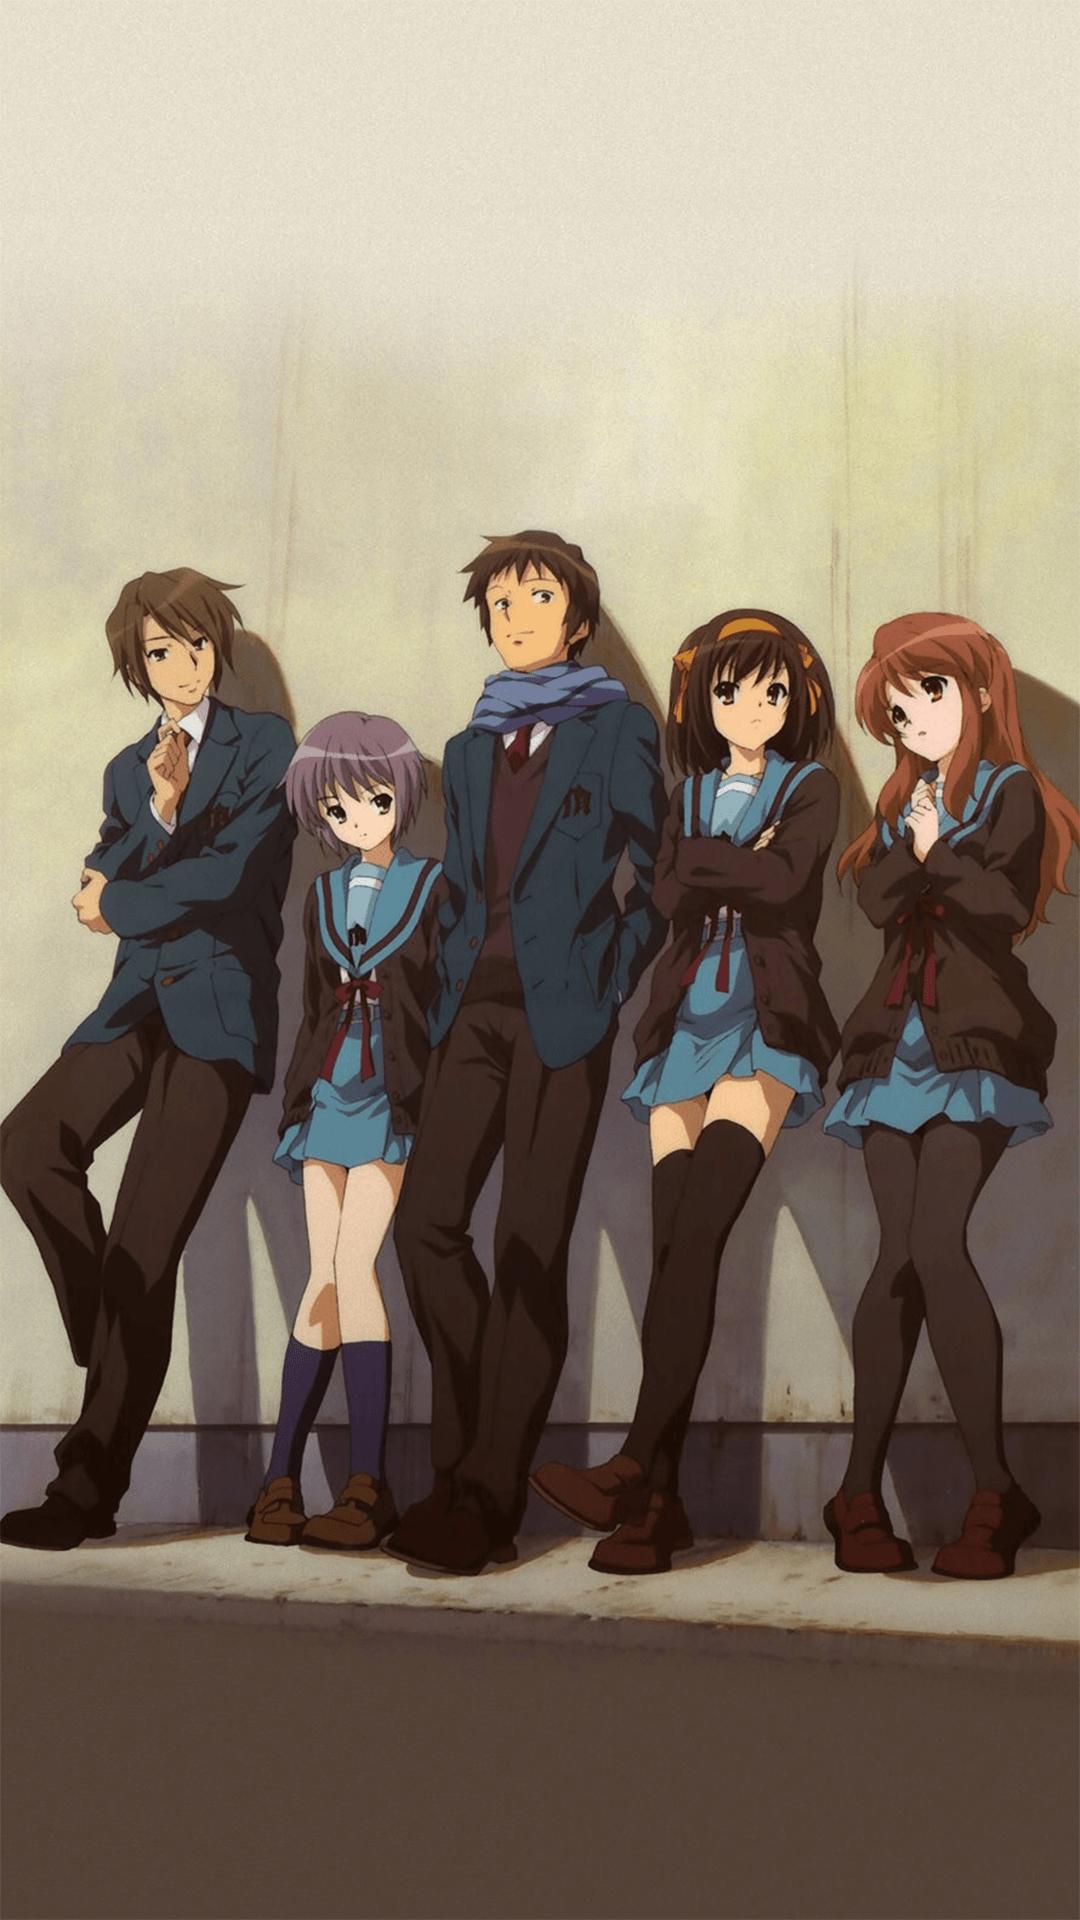 The Disappearance Of Haruhi Suzumiya Wallpaper 4k Download For Laptop